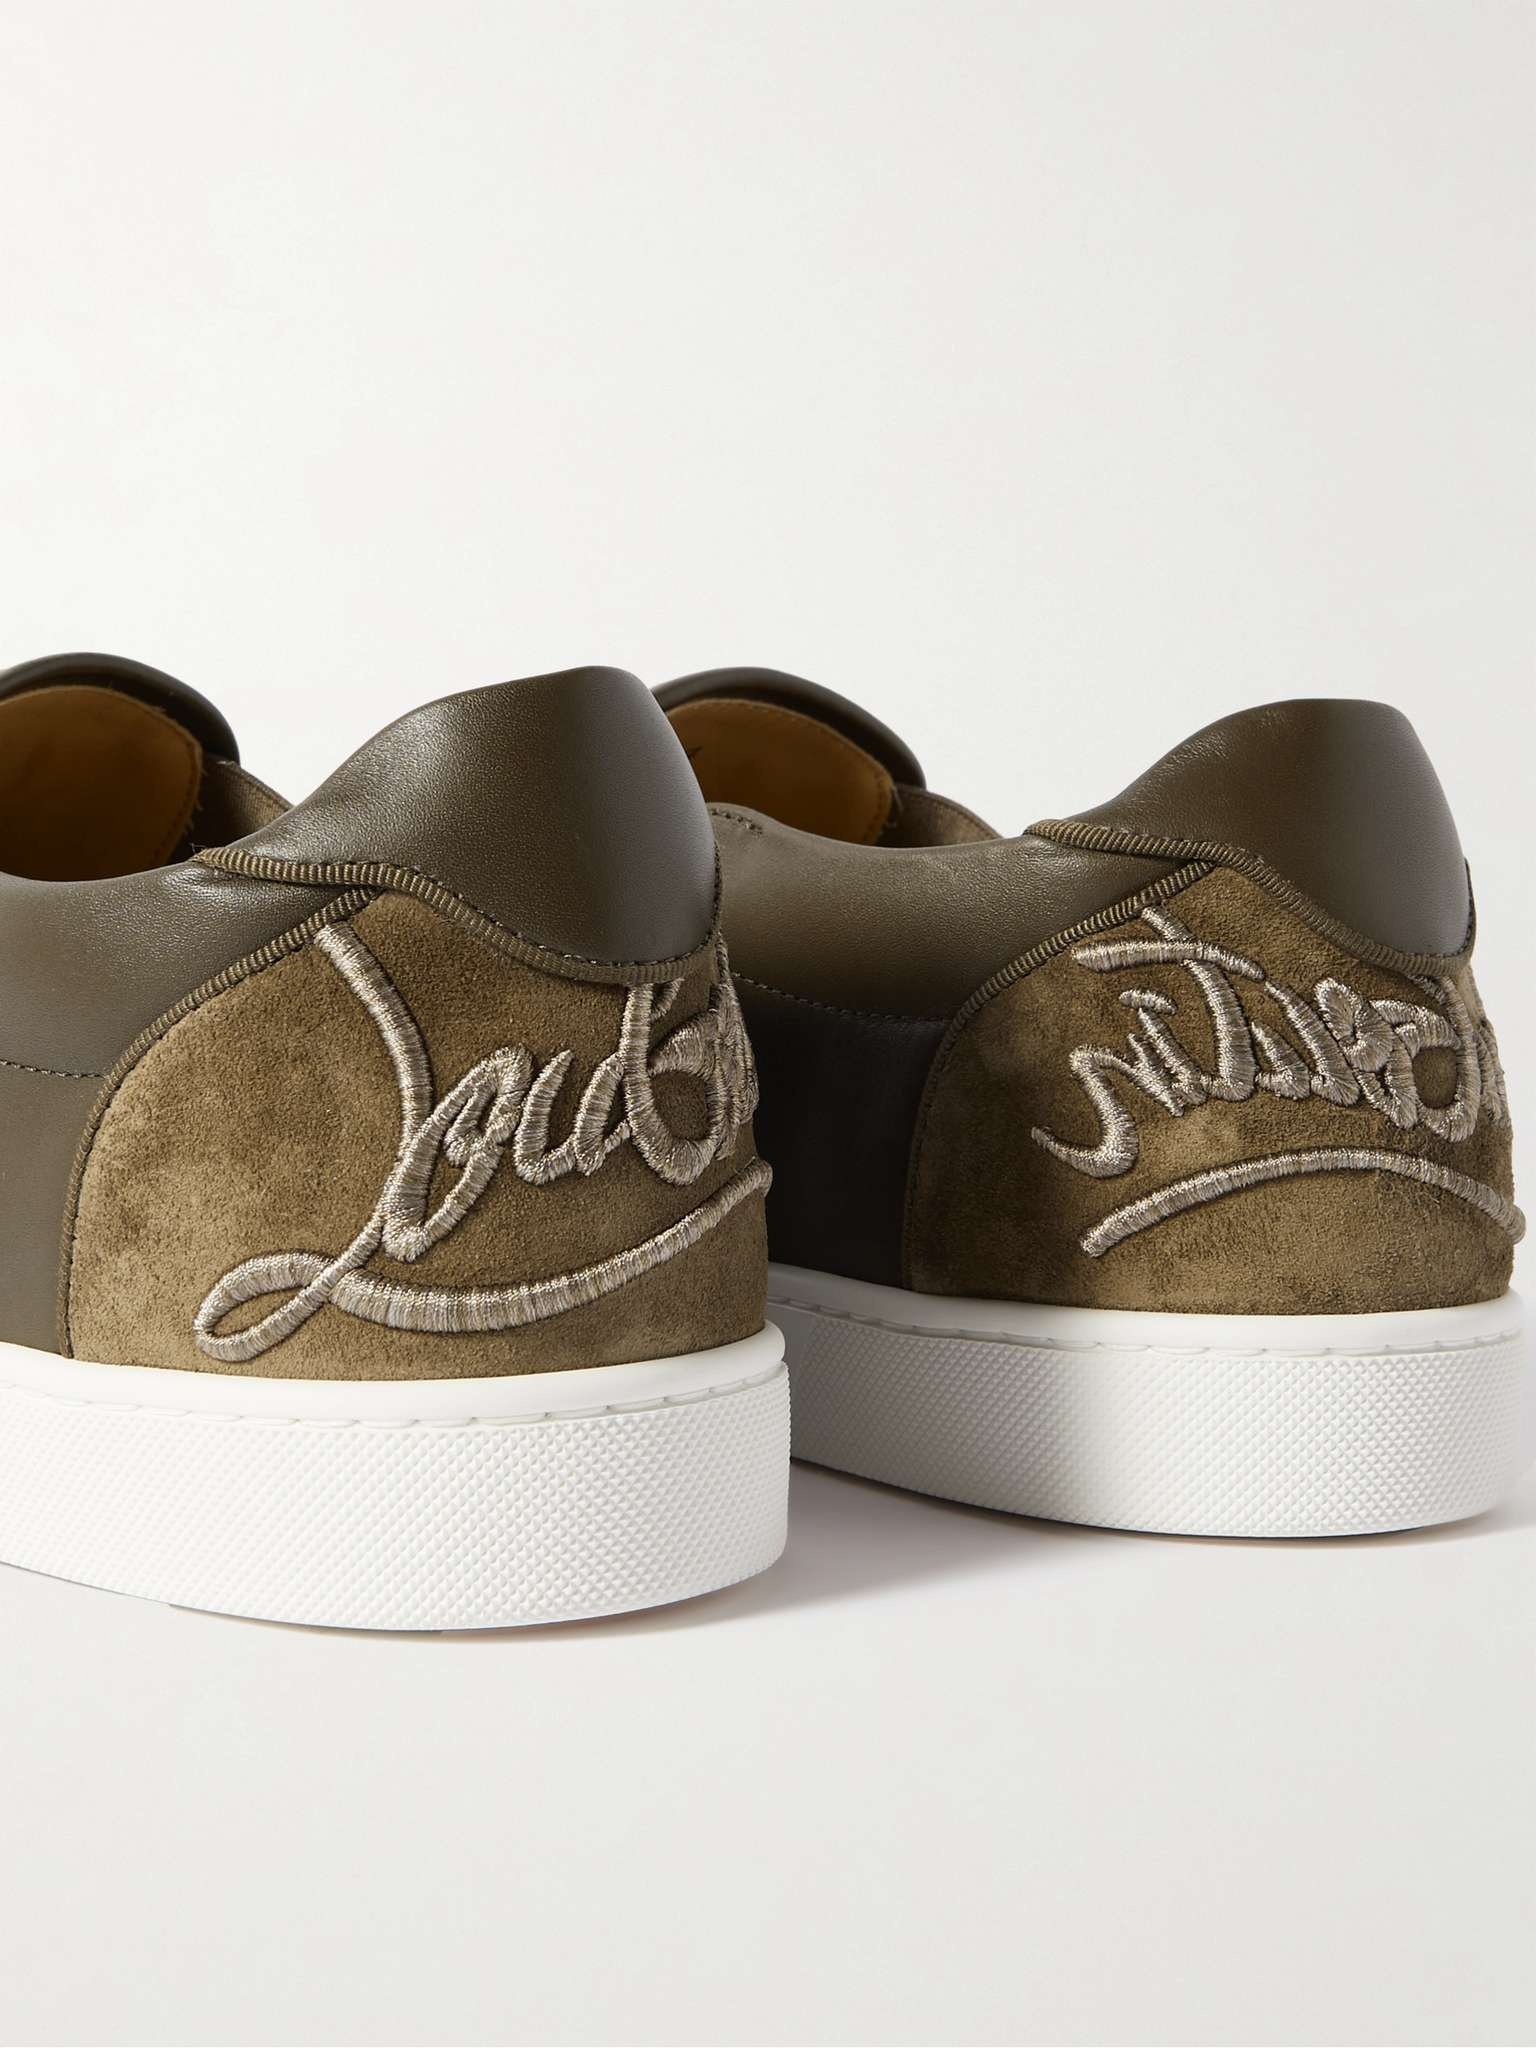 Fun Sailor Leather-Trimmed Perforated Suede Slip-On Sneakers - 6